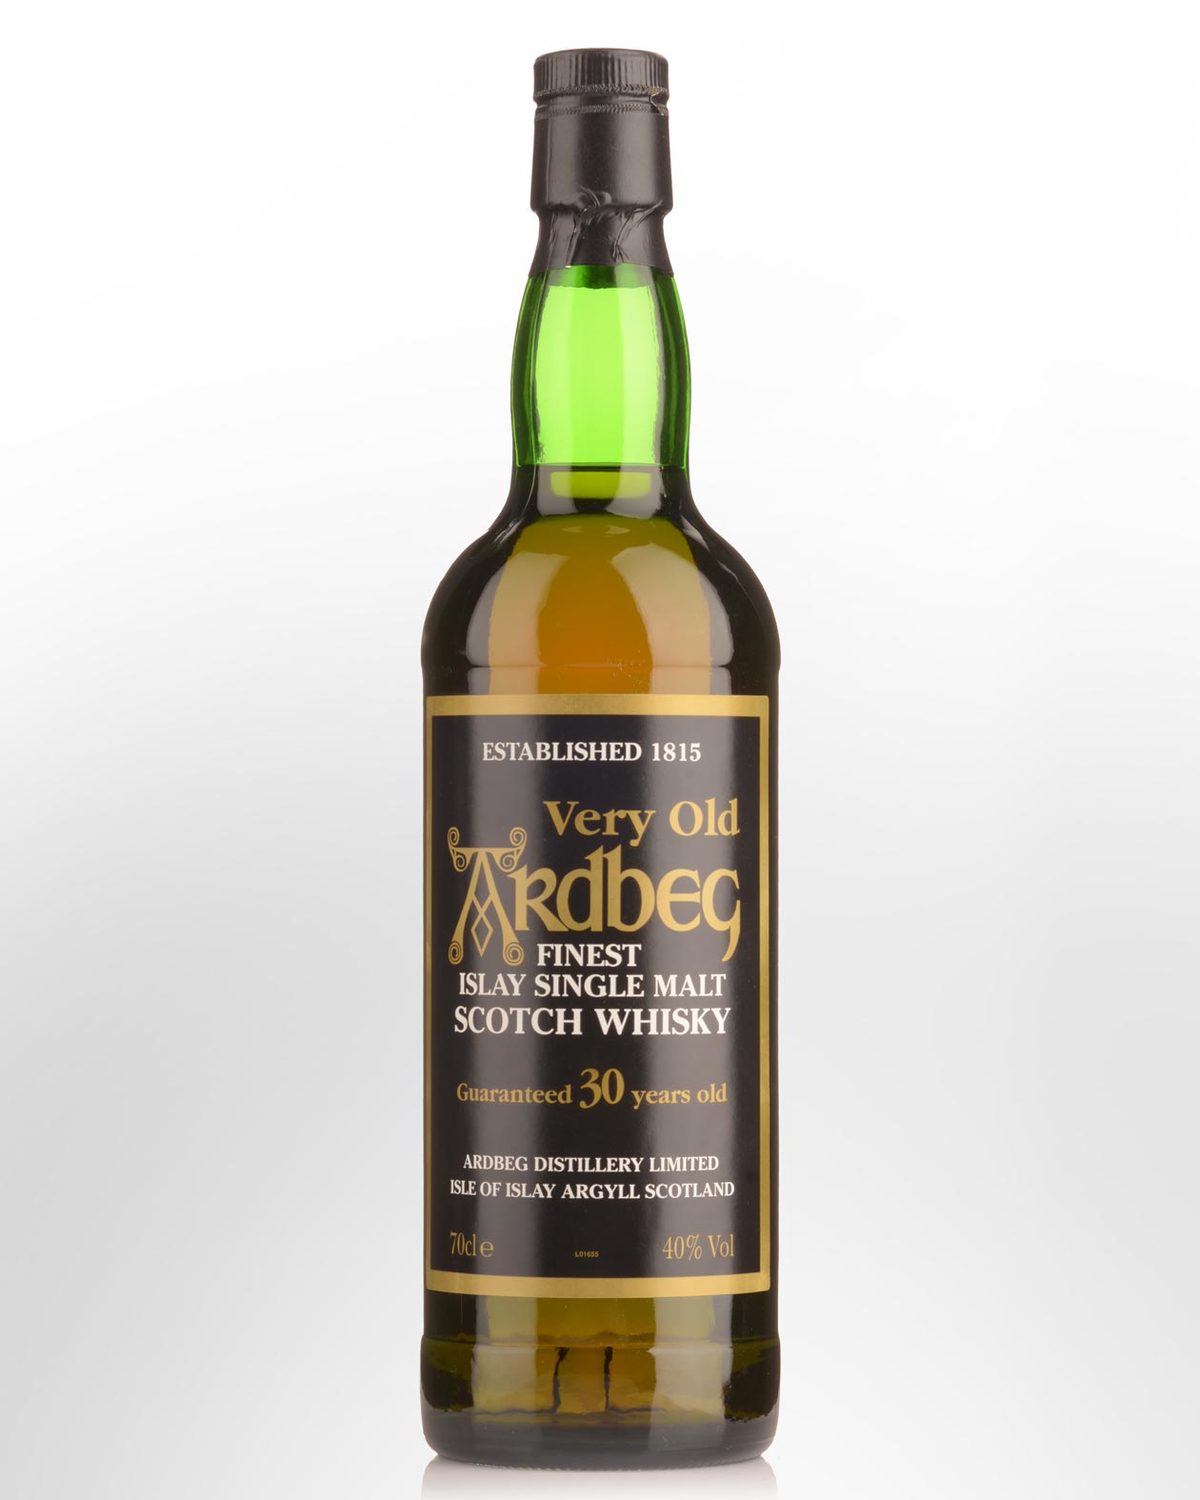 Ardbeg (アードベッグ) Very Old 30 years old